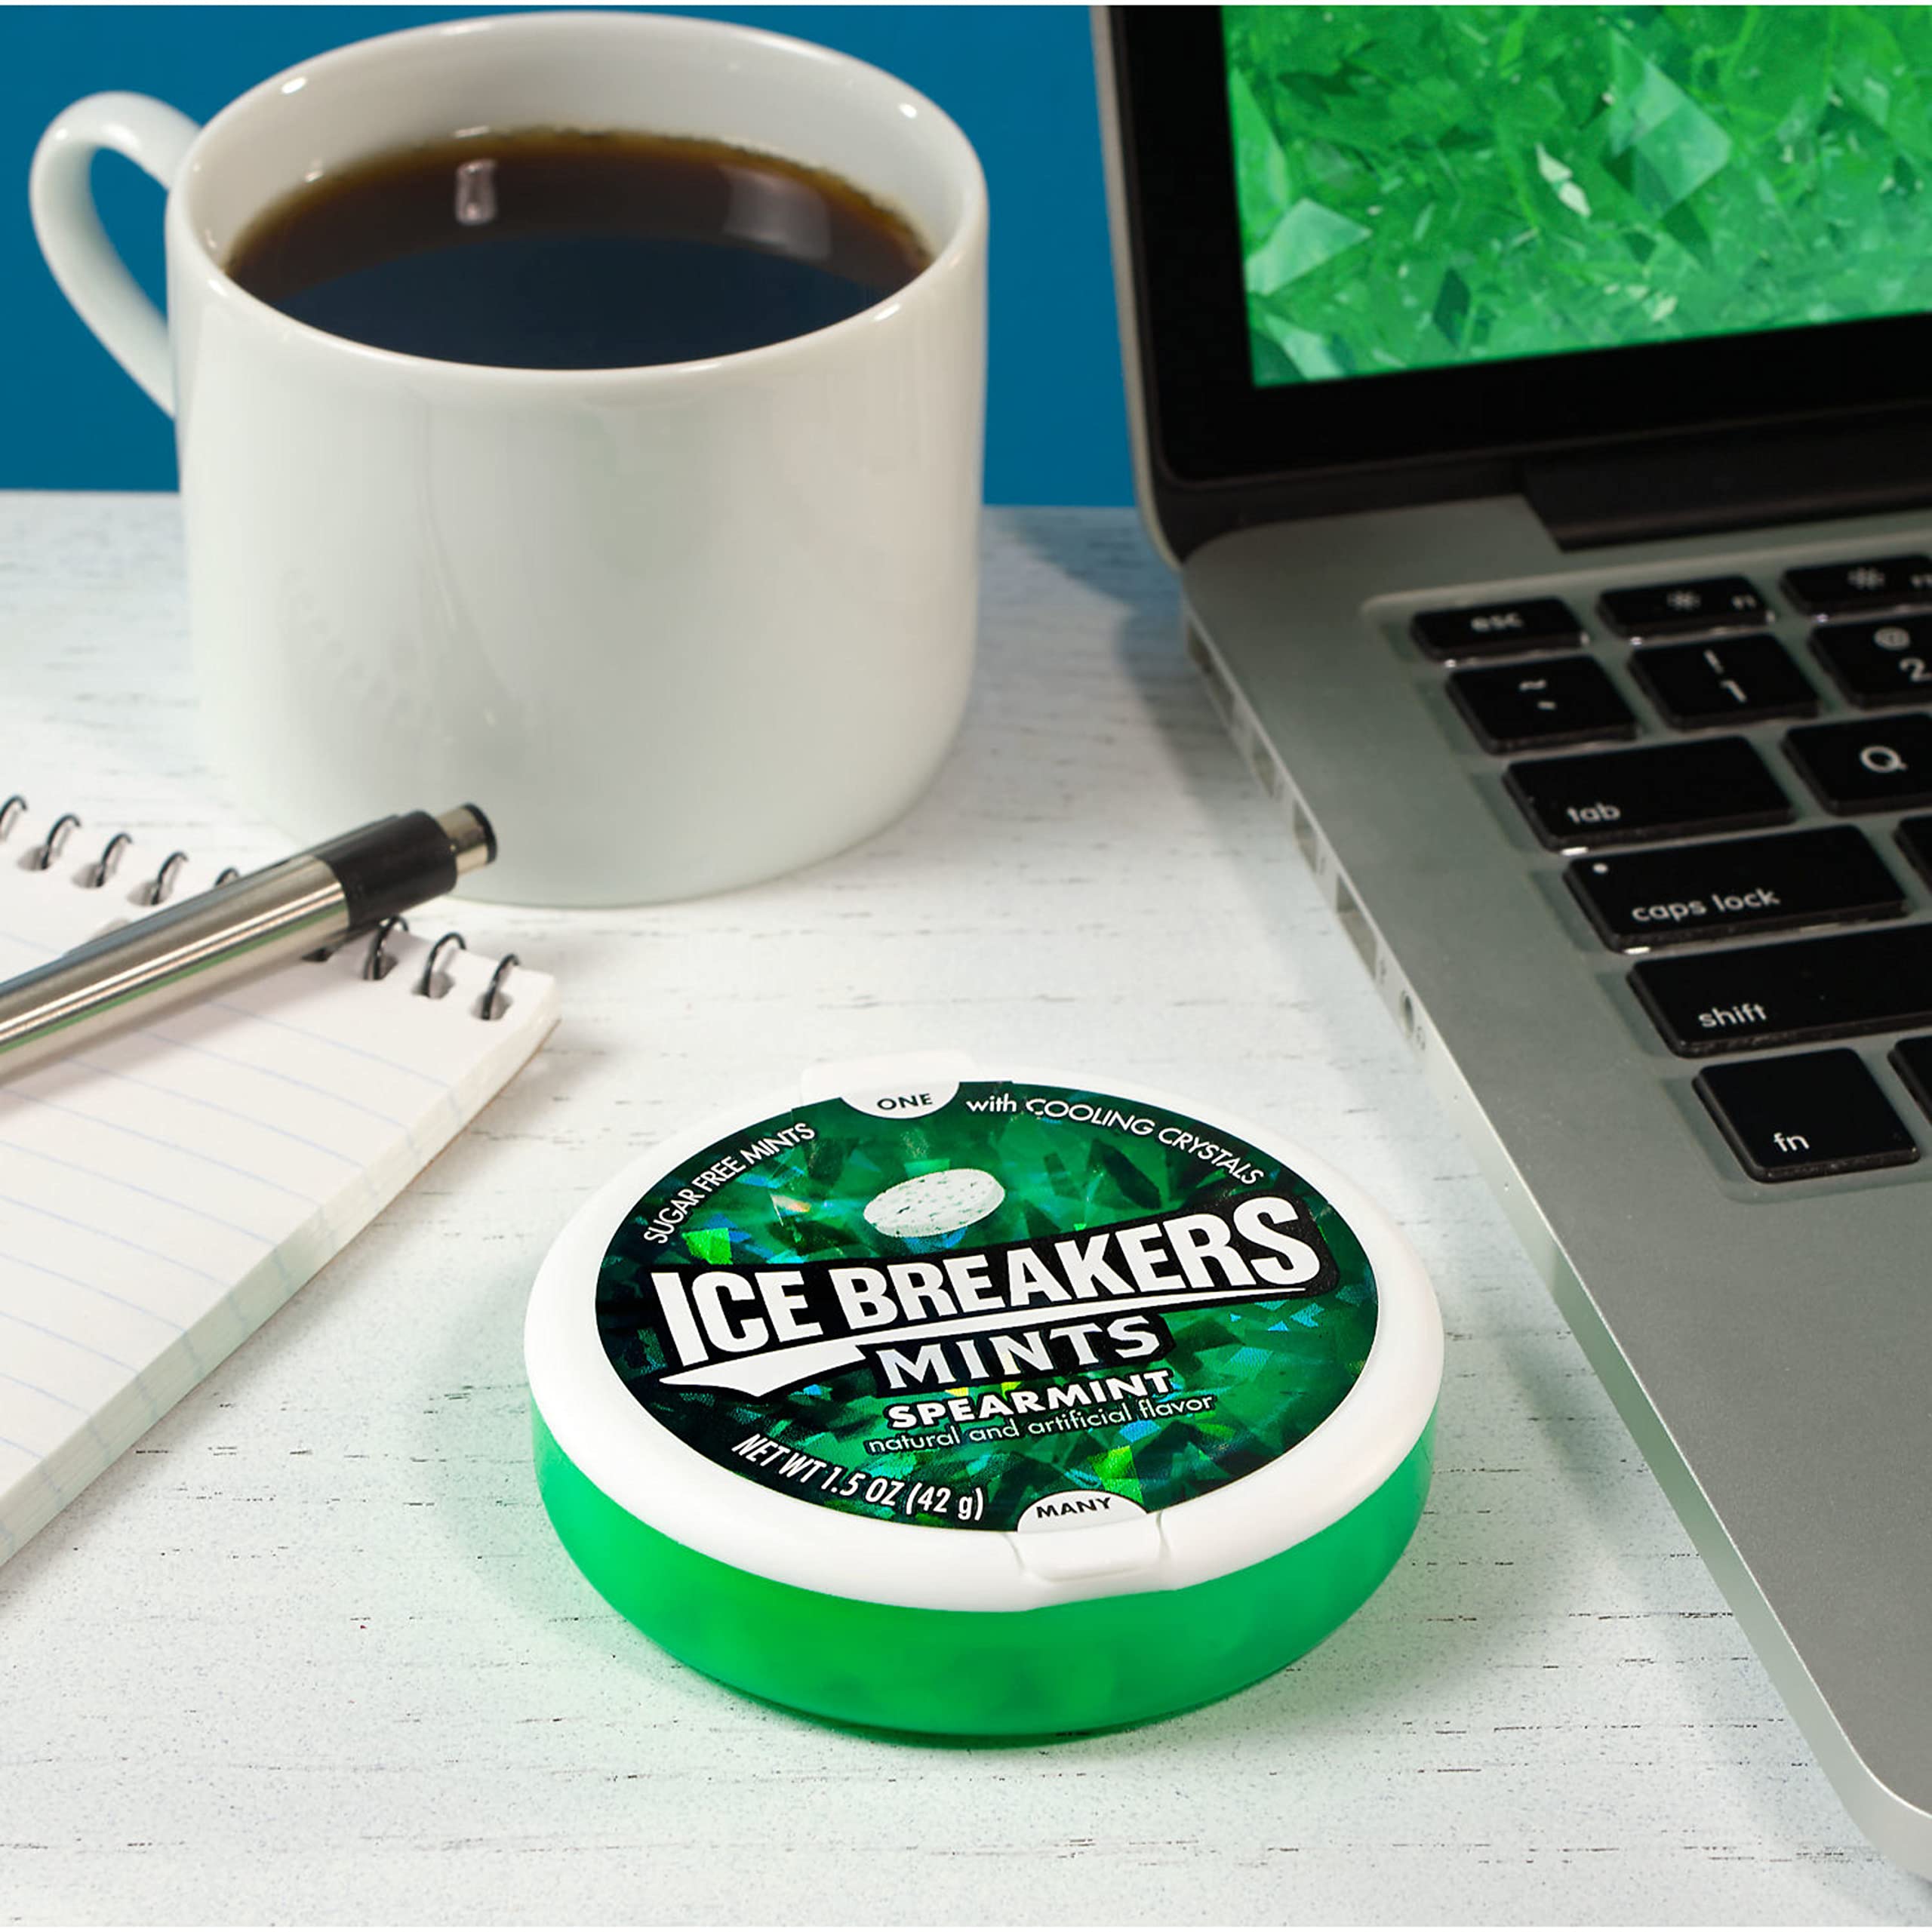 ICE BREAKERS Spearmint With Cooling Crystals, Bulk Sugar Free Mints Tins, 1.5 oz (8 ct)